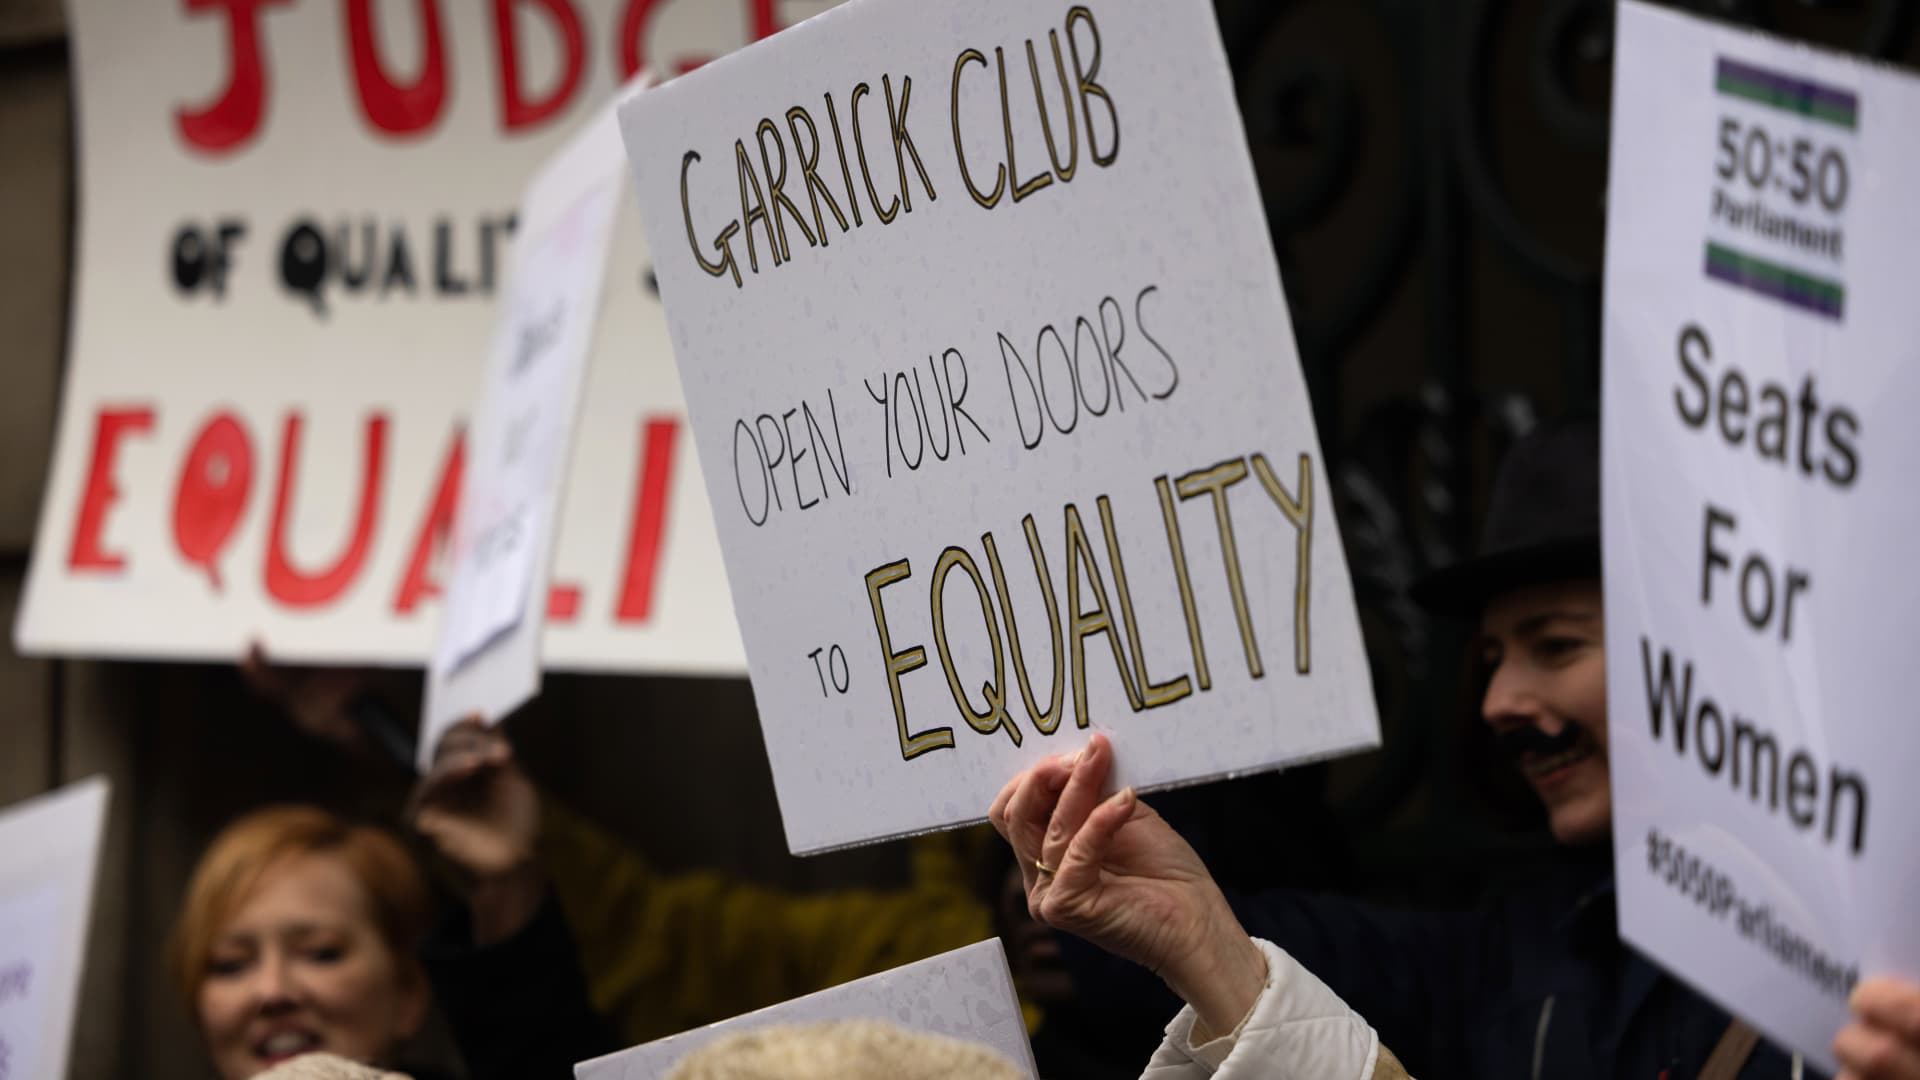 London’s elite Garrick Club votes to allow women for the first time